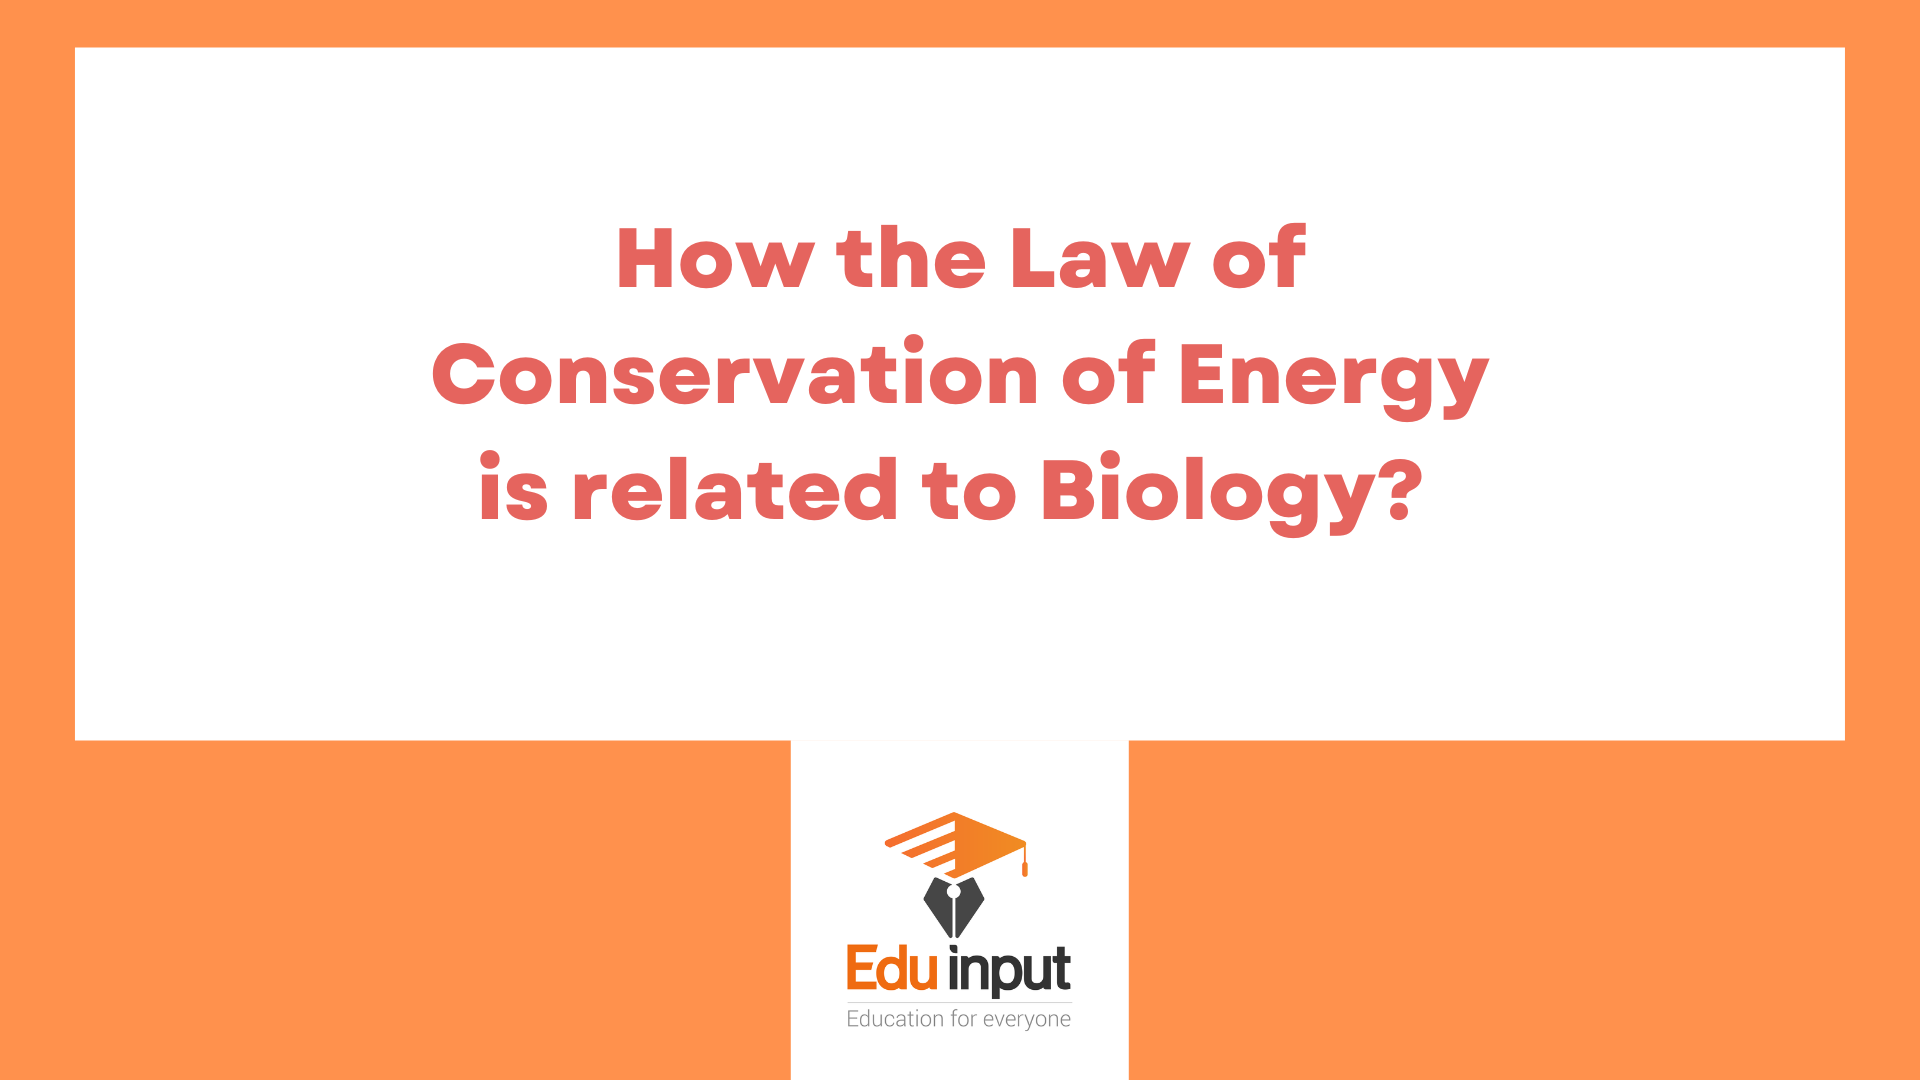 How the Law of Conservation of Energy is related to Biology?